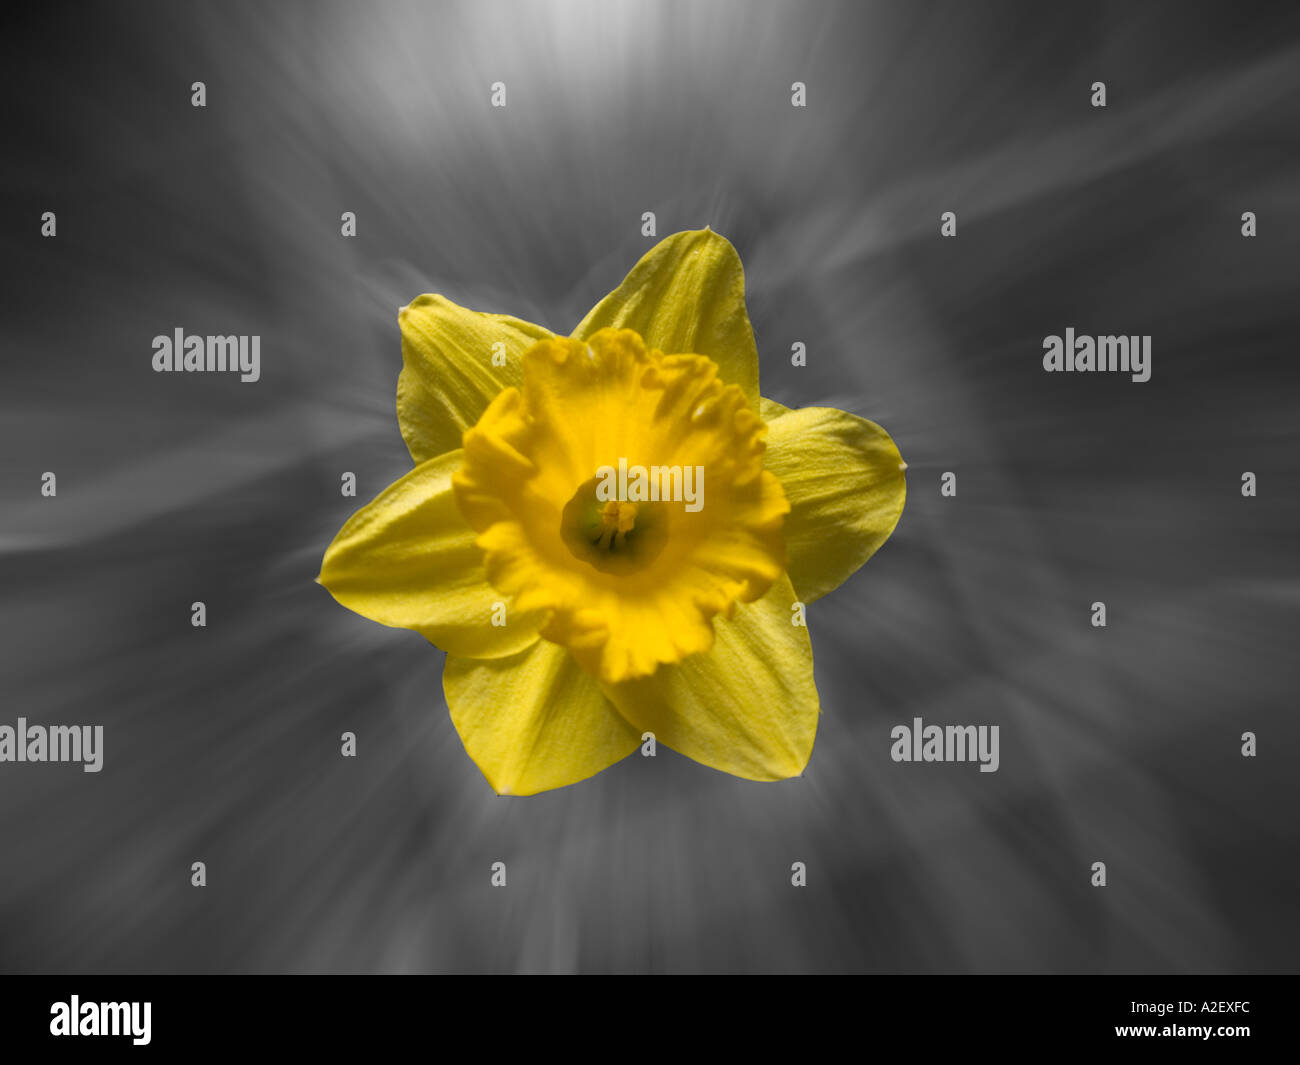 Close up of Daffodil with Grey zoomed background Stock Photo